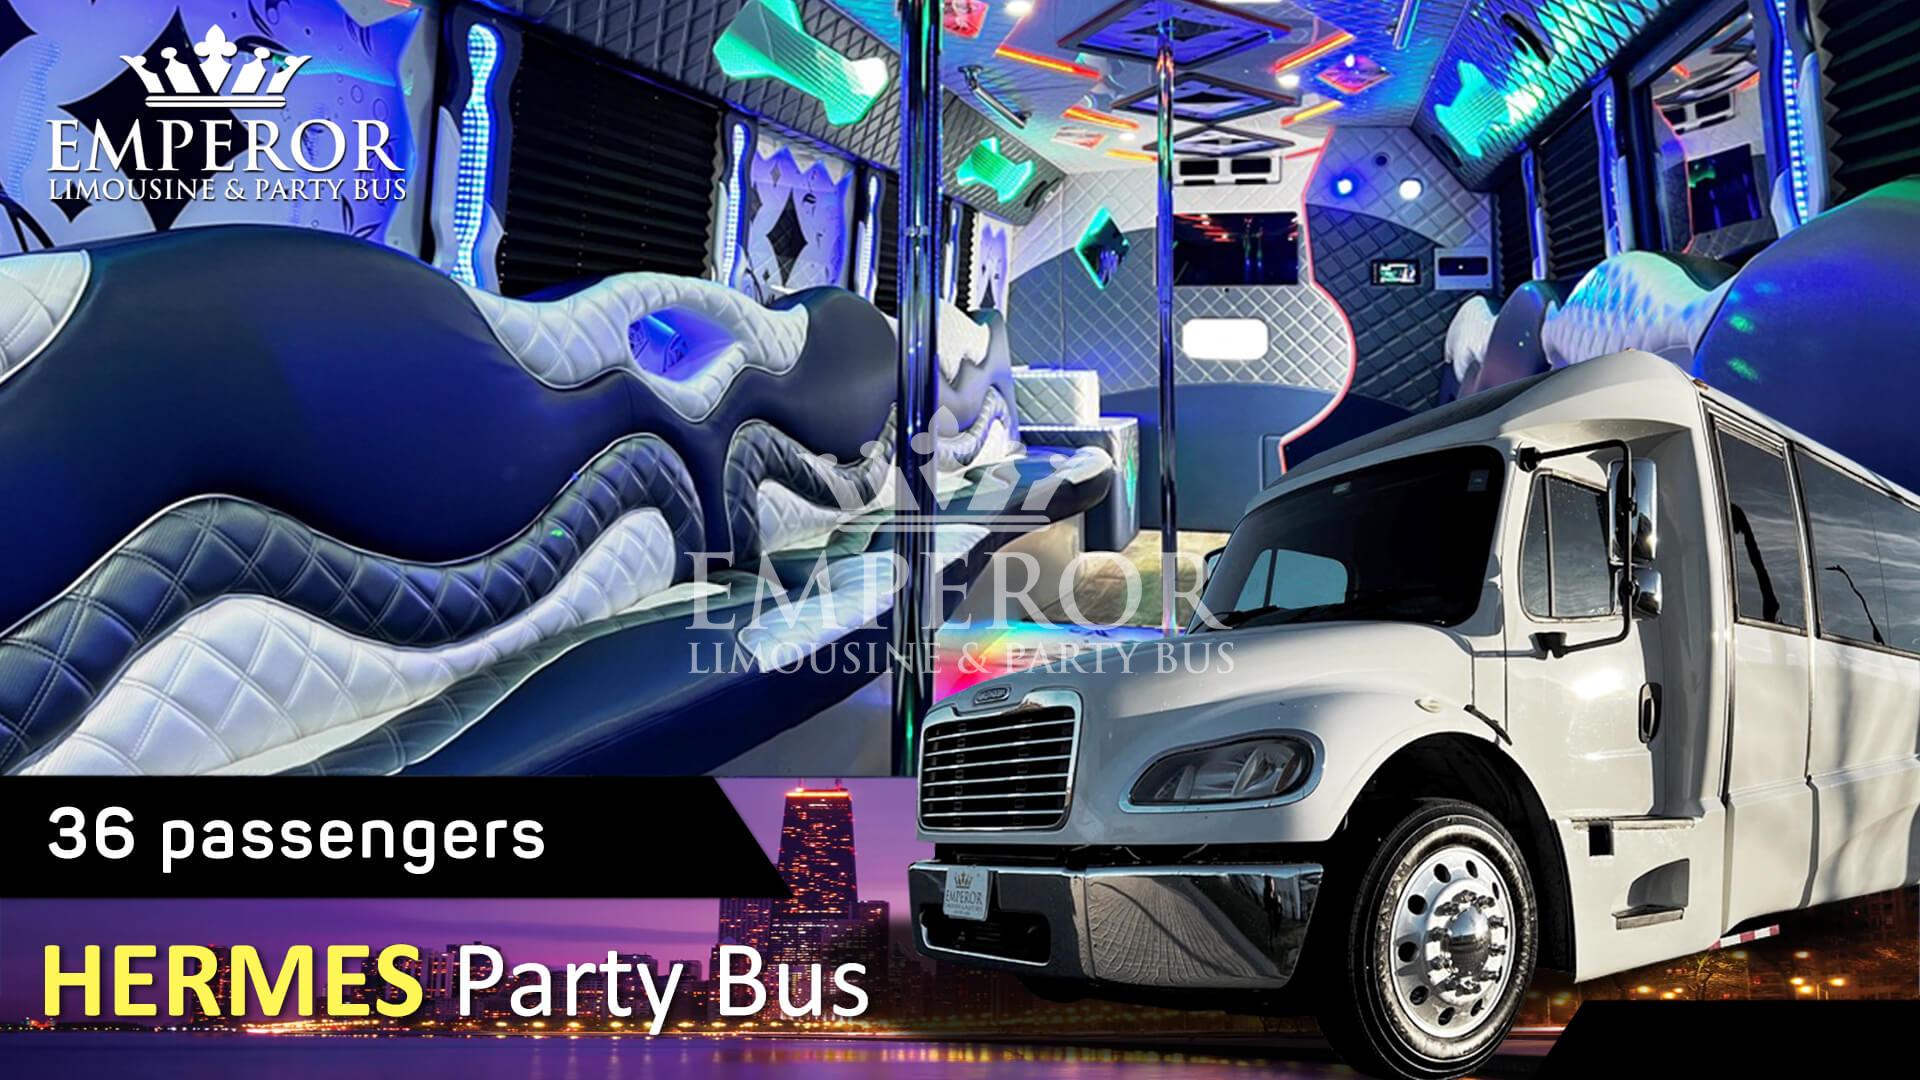 Party bus rental in Barrington, IL - Hermes Edition